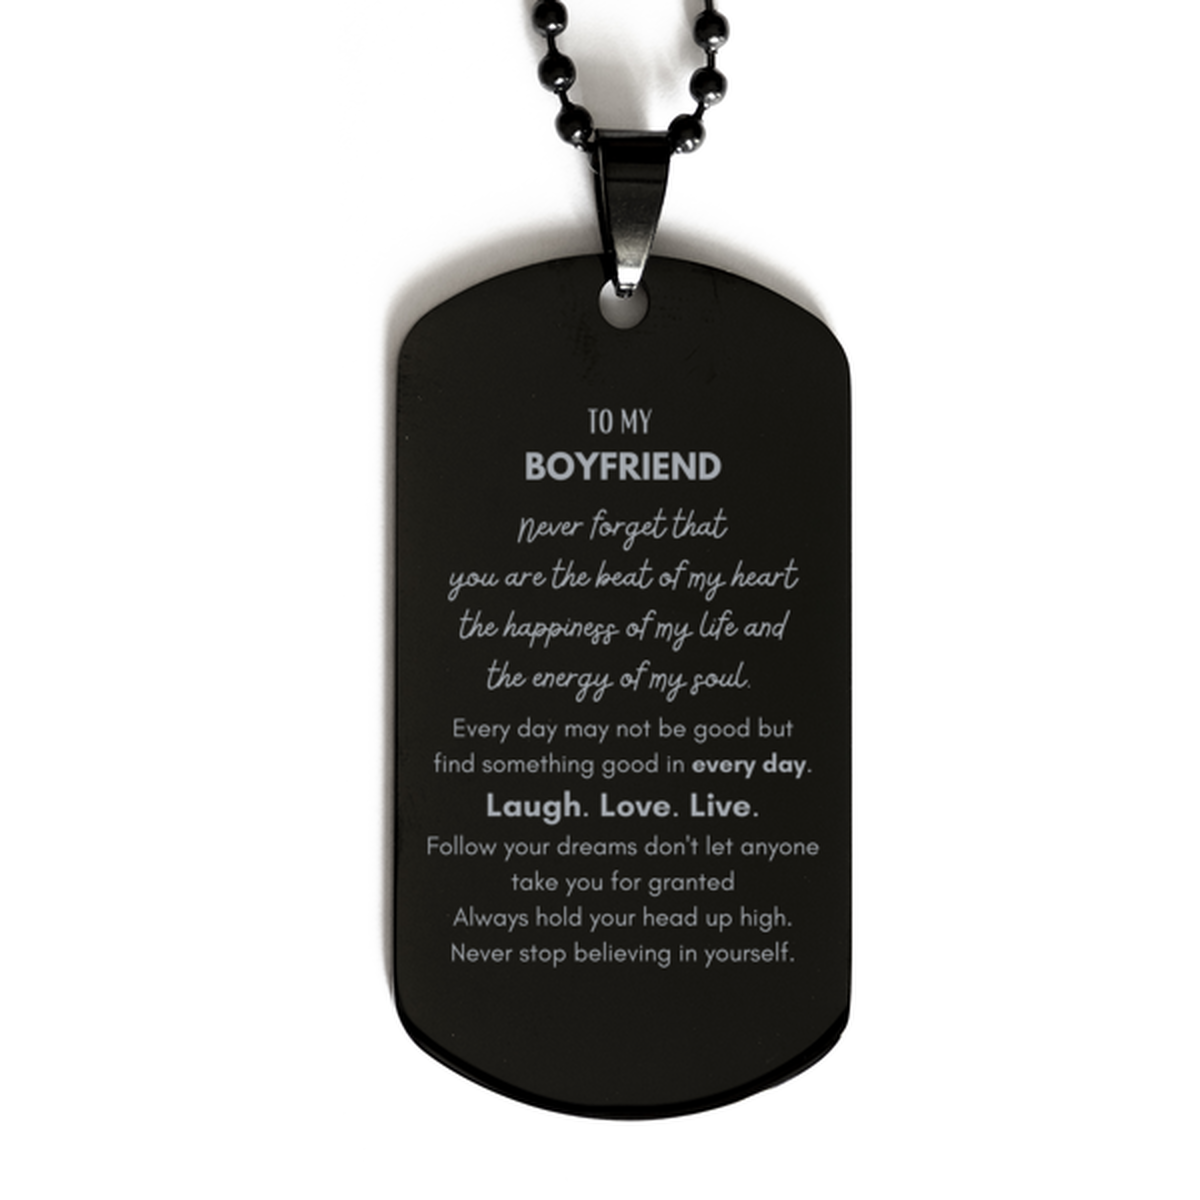 To My Boyfriend Dogtag Gifts, Christmas Boyfriend Black Dog Tag Present, Birthday Unique Motivational For Boyfriend, To My Boyfriend Never forget that you are the beat of my heart the happiness of my life and the energy of my soul